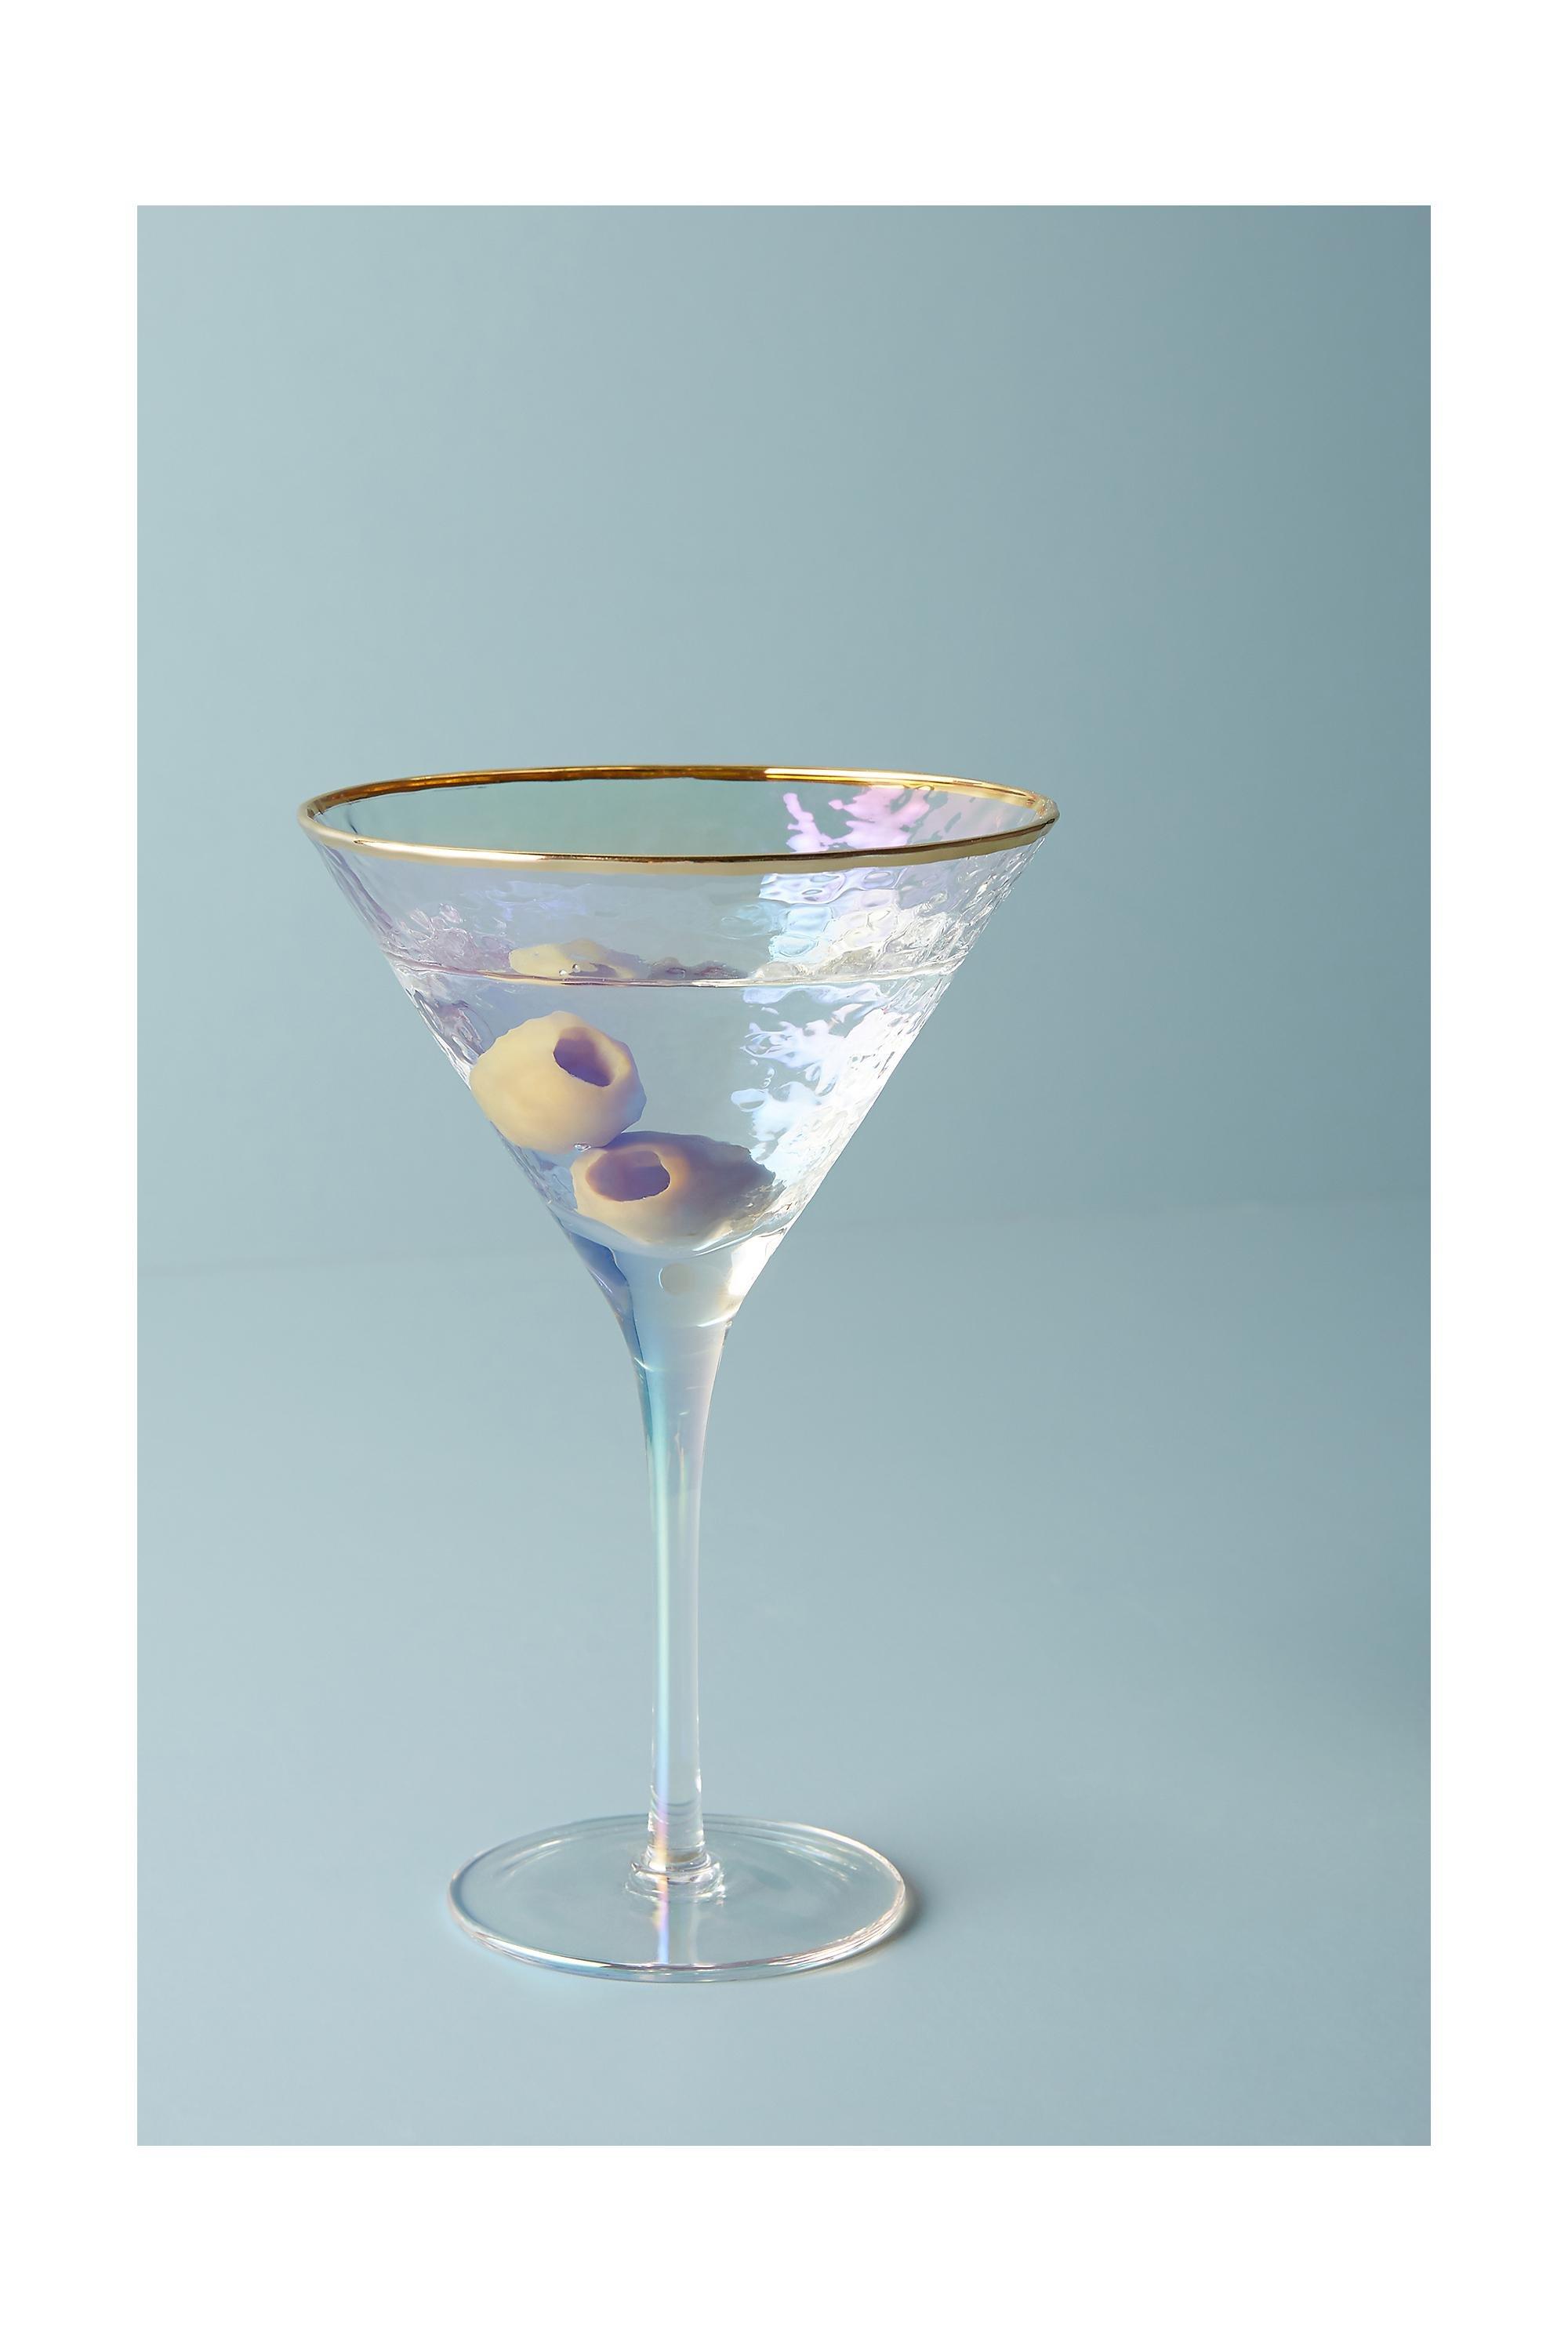 Anthropologie - Lustered Martini Glass, Oyster